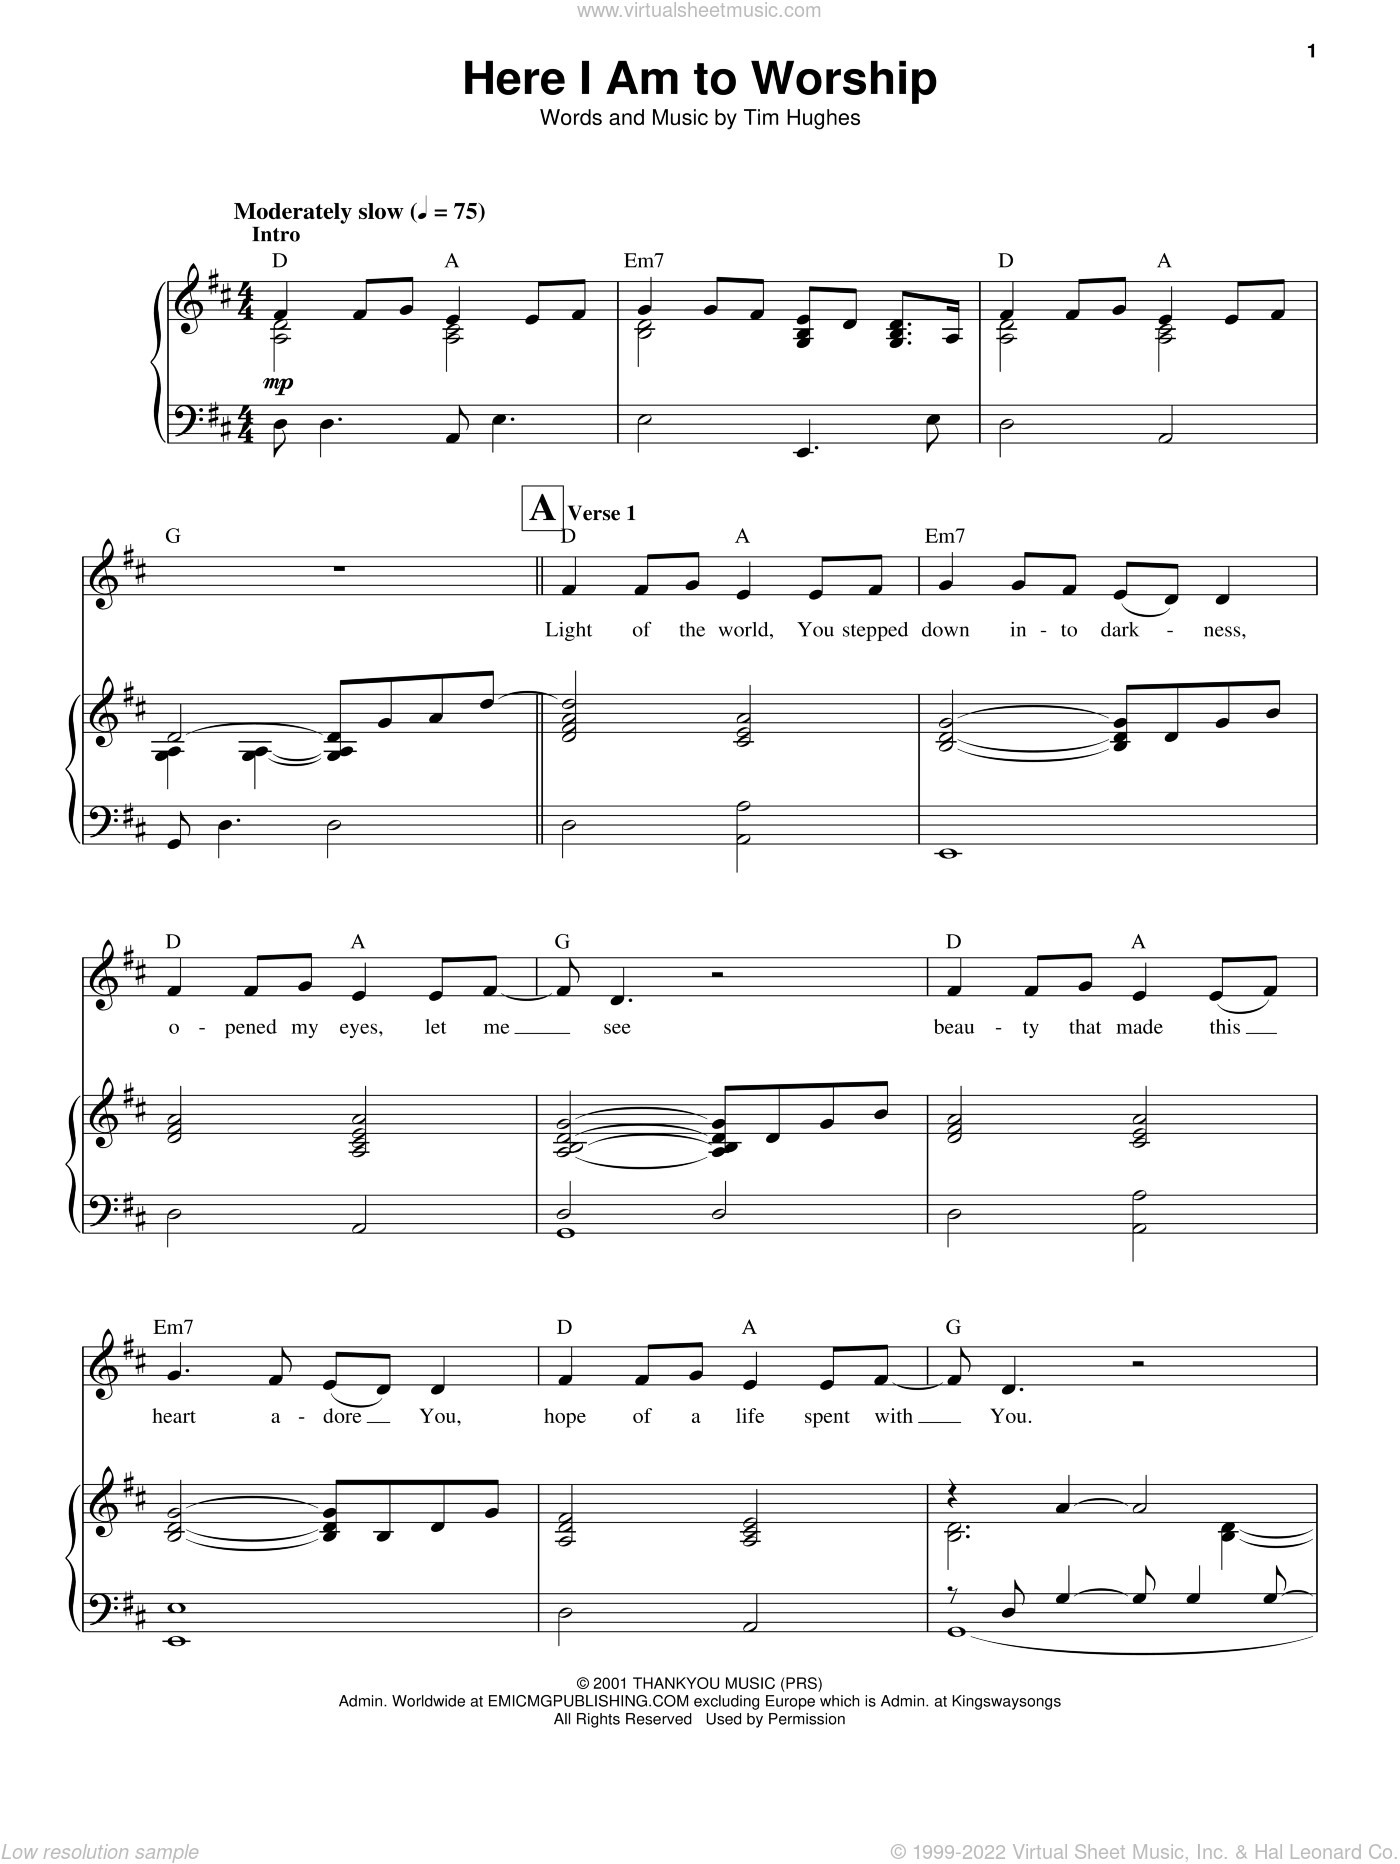 Dean - Here I Am To Worship sheet music for voice and piano [PDF]